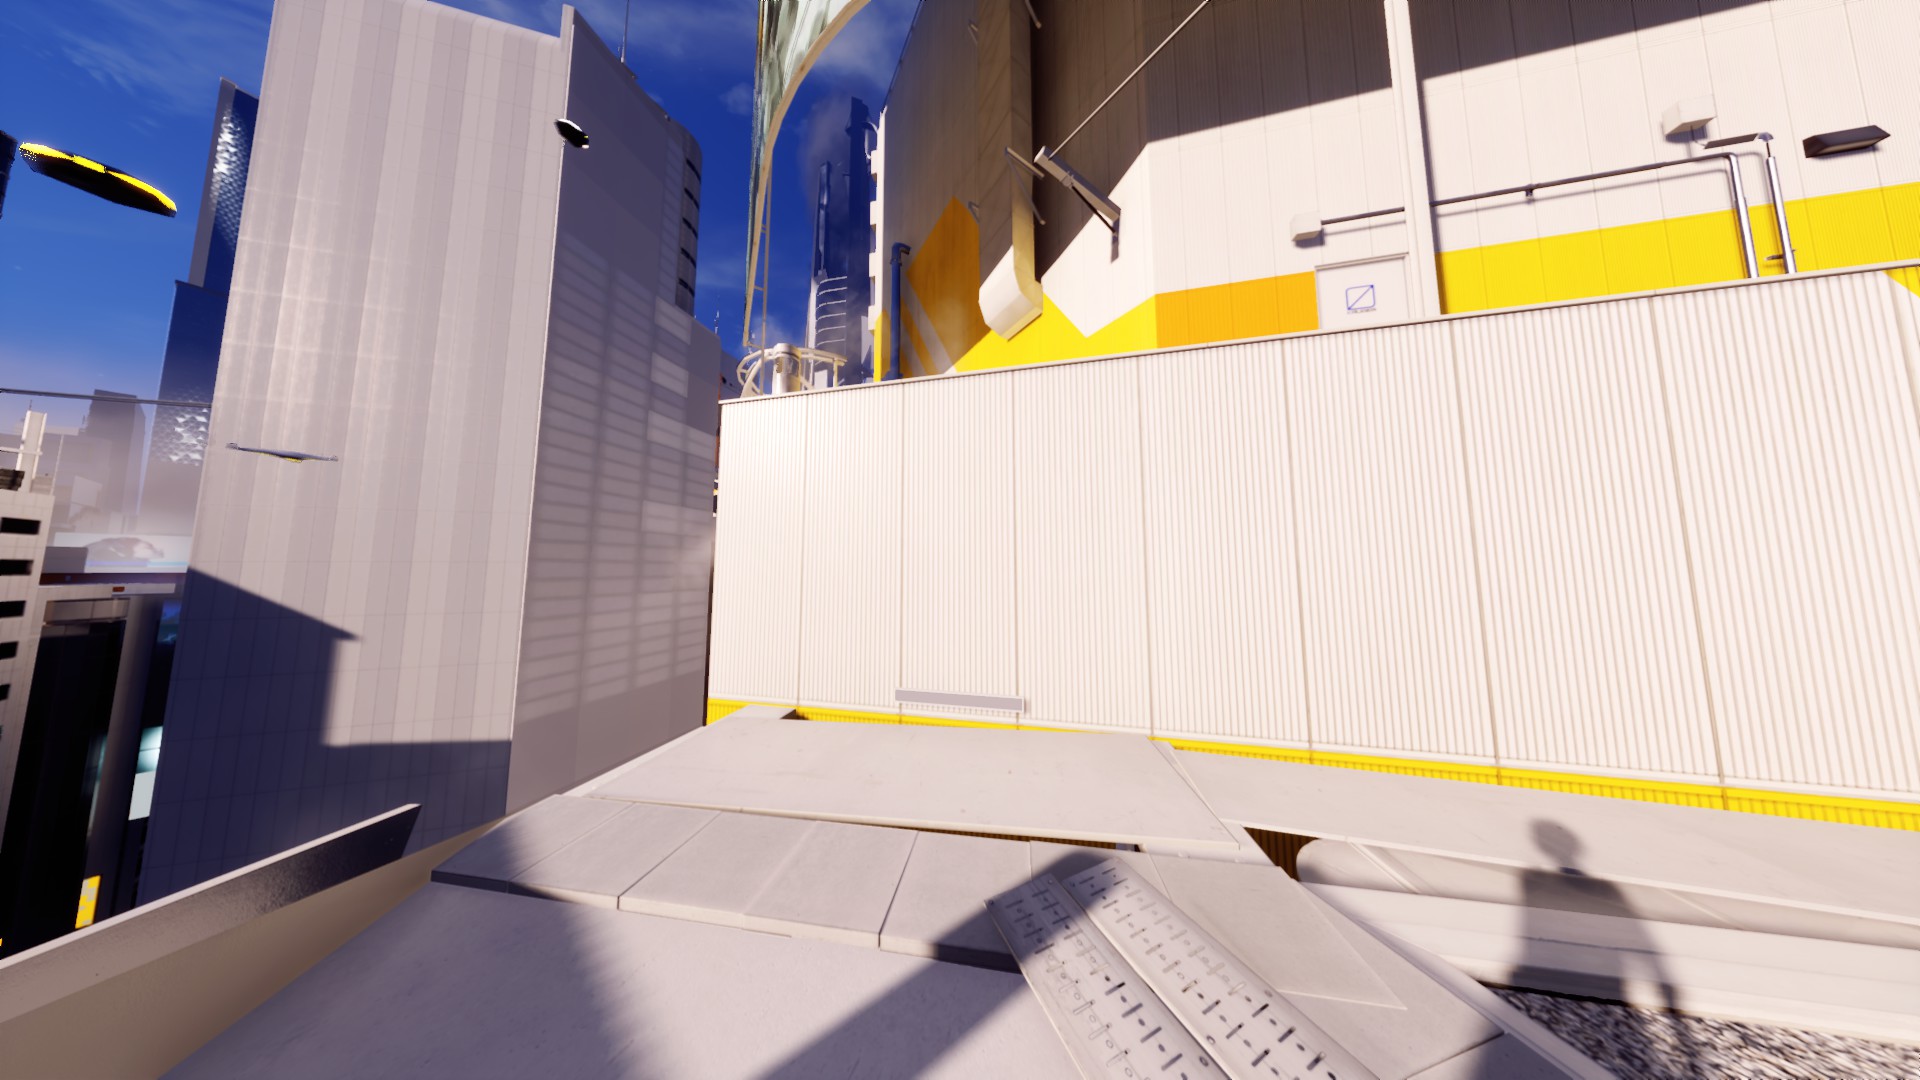 OUTDATED SEE DESCRIPTION] How to install mods for speedrunning Mirror's Edge:  Catalyst 